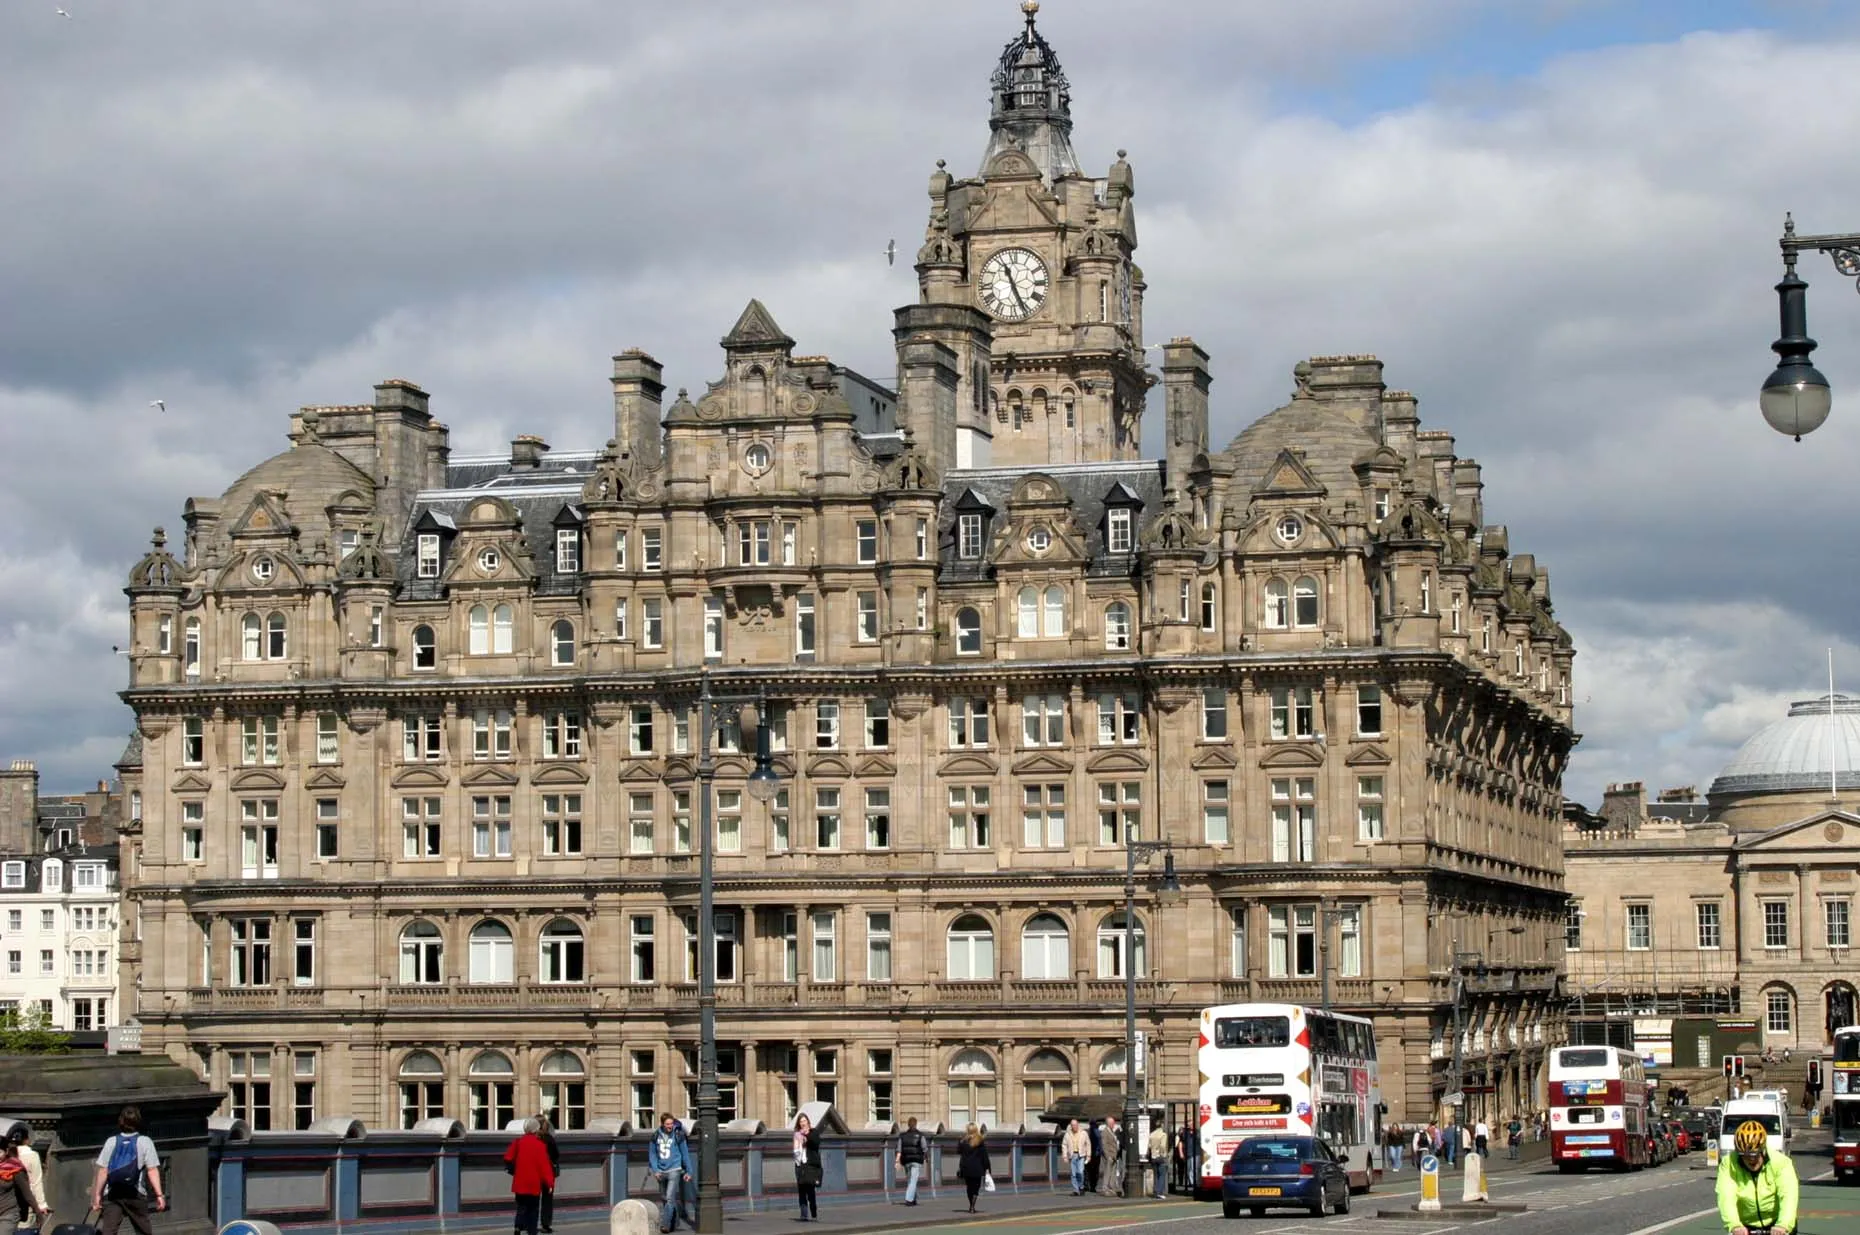 Photo showing: The Balmoral Hotel, Edinburgh, Scotland. Designed by W Hamilton Beattie, built 1896-1902. The clock on the tower is intentionally set two minutes fast to allow rail passengers that extra bit of time.